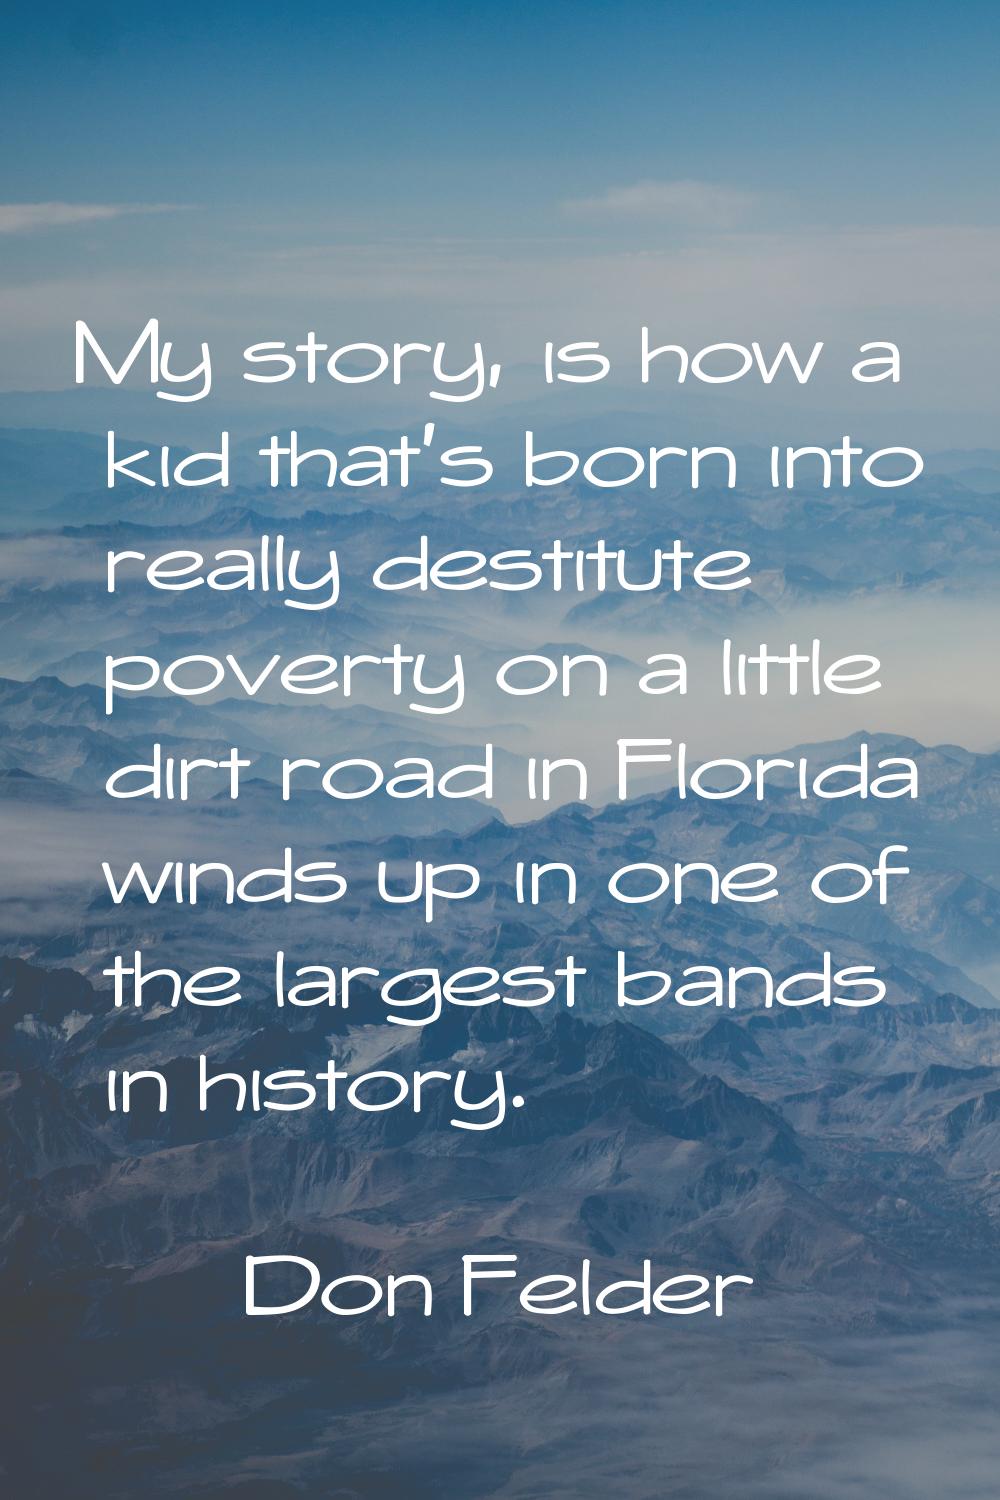 My story, is how a kid that's born into really destitute poverty on a little dirt road in Florida w